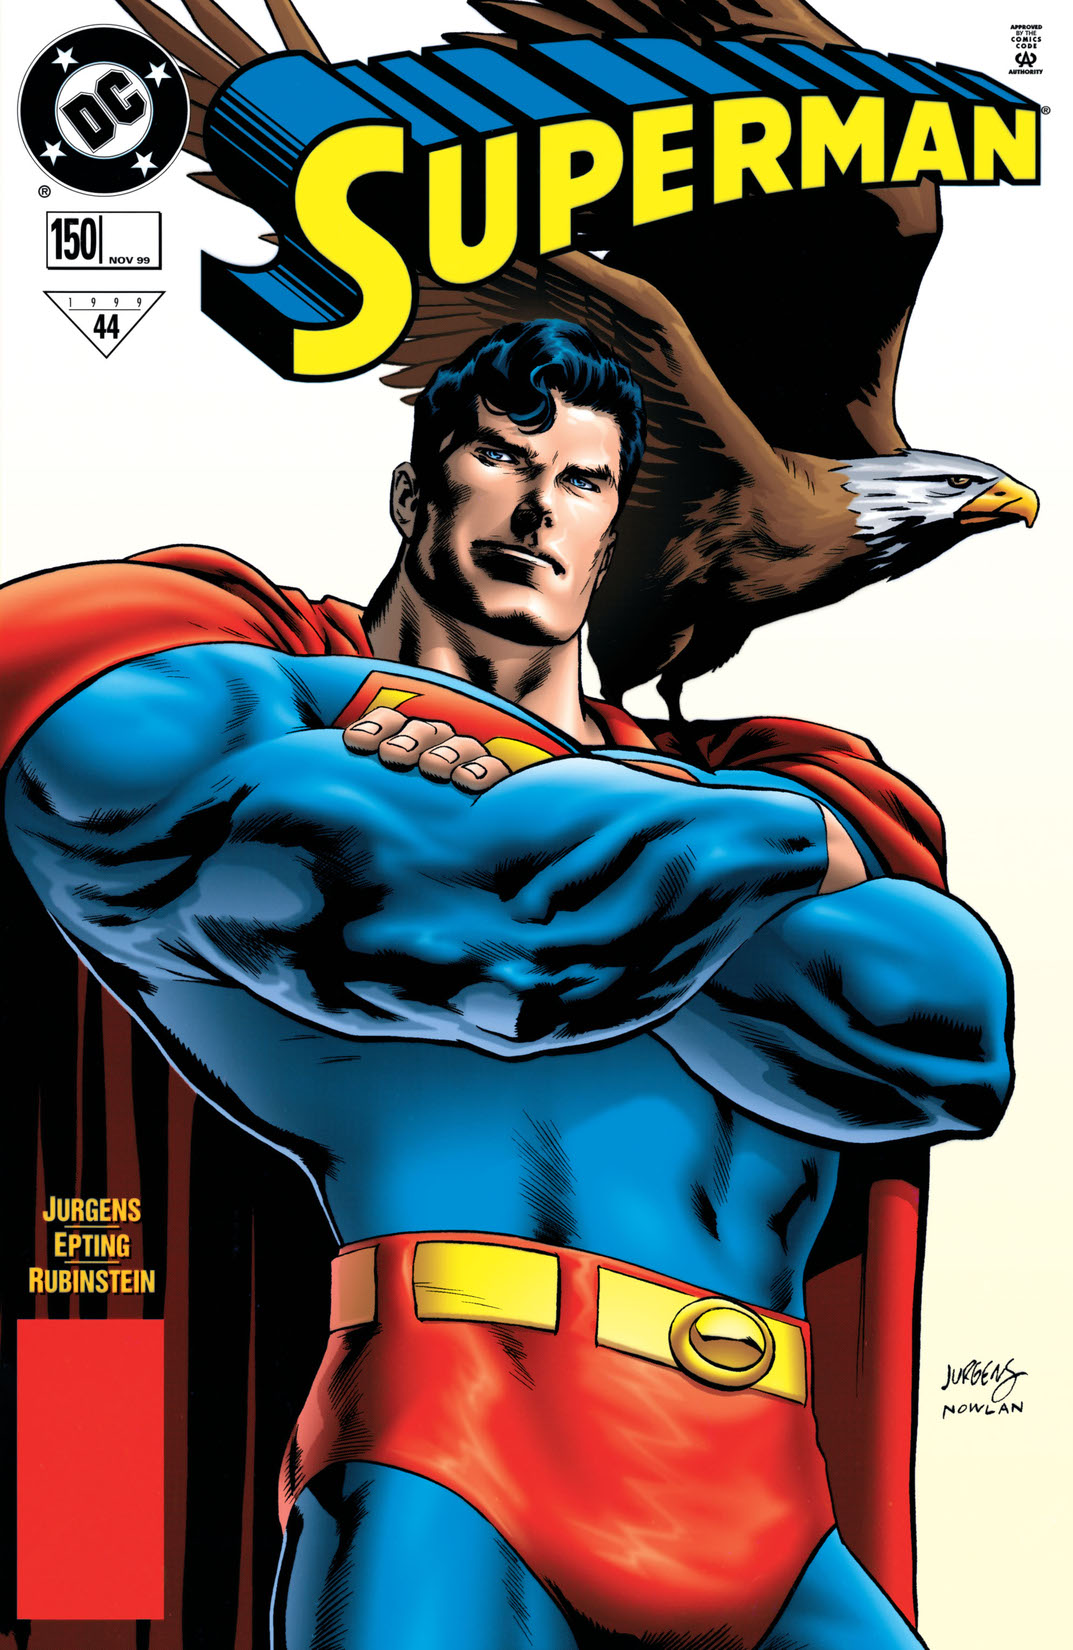 Superman (1986-2006) #150 preview images